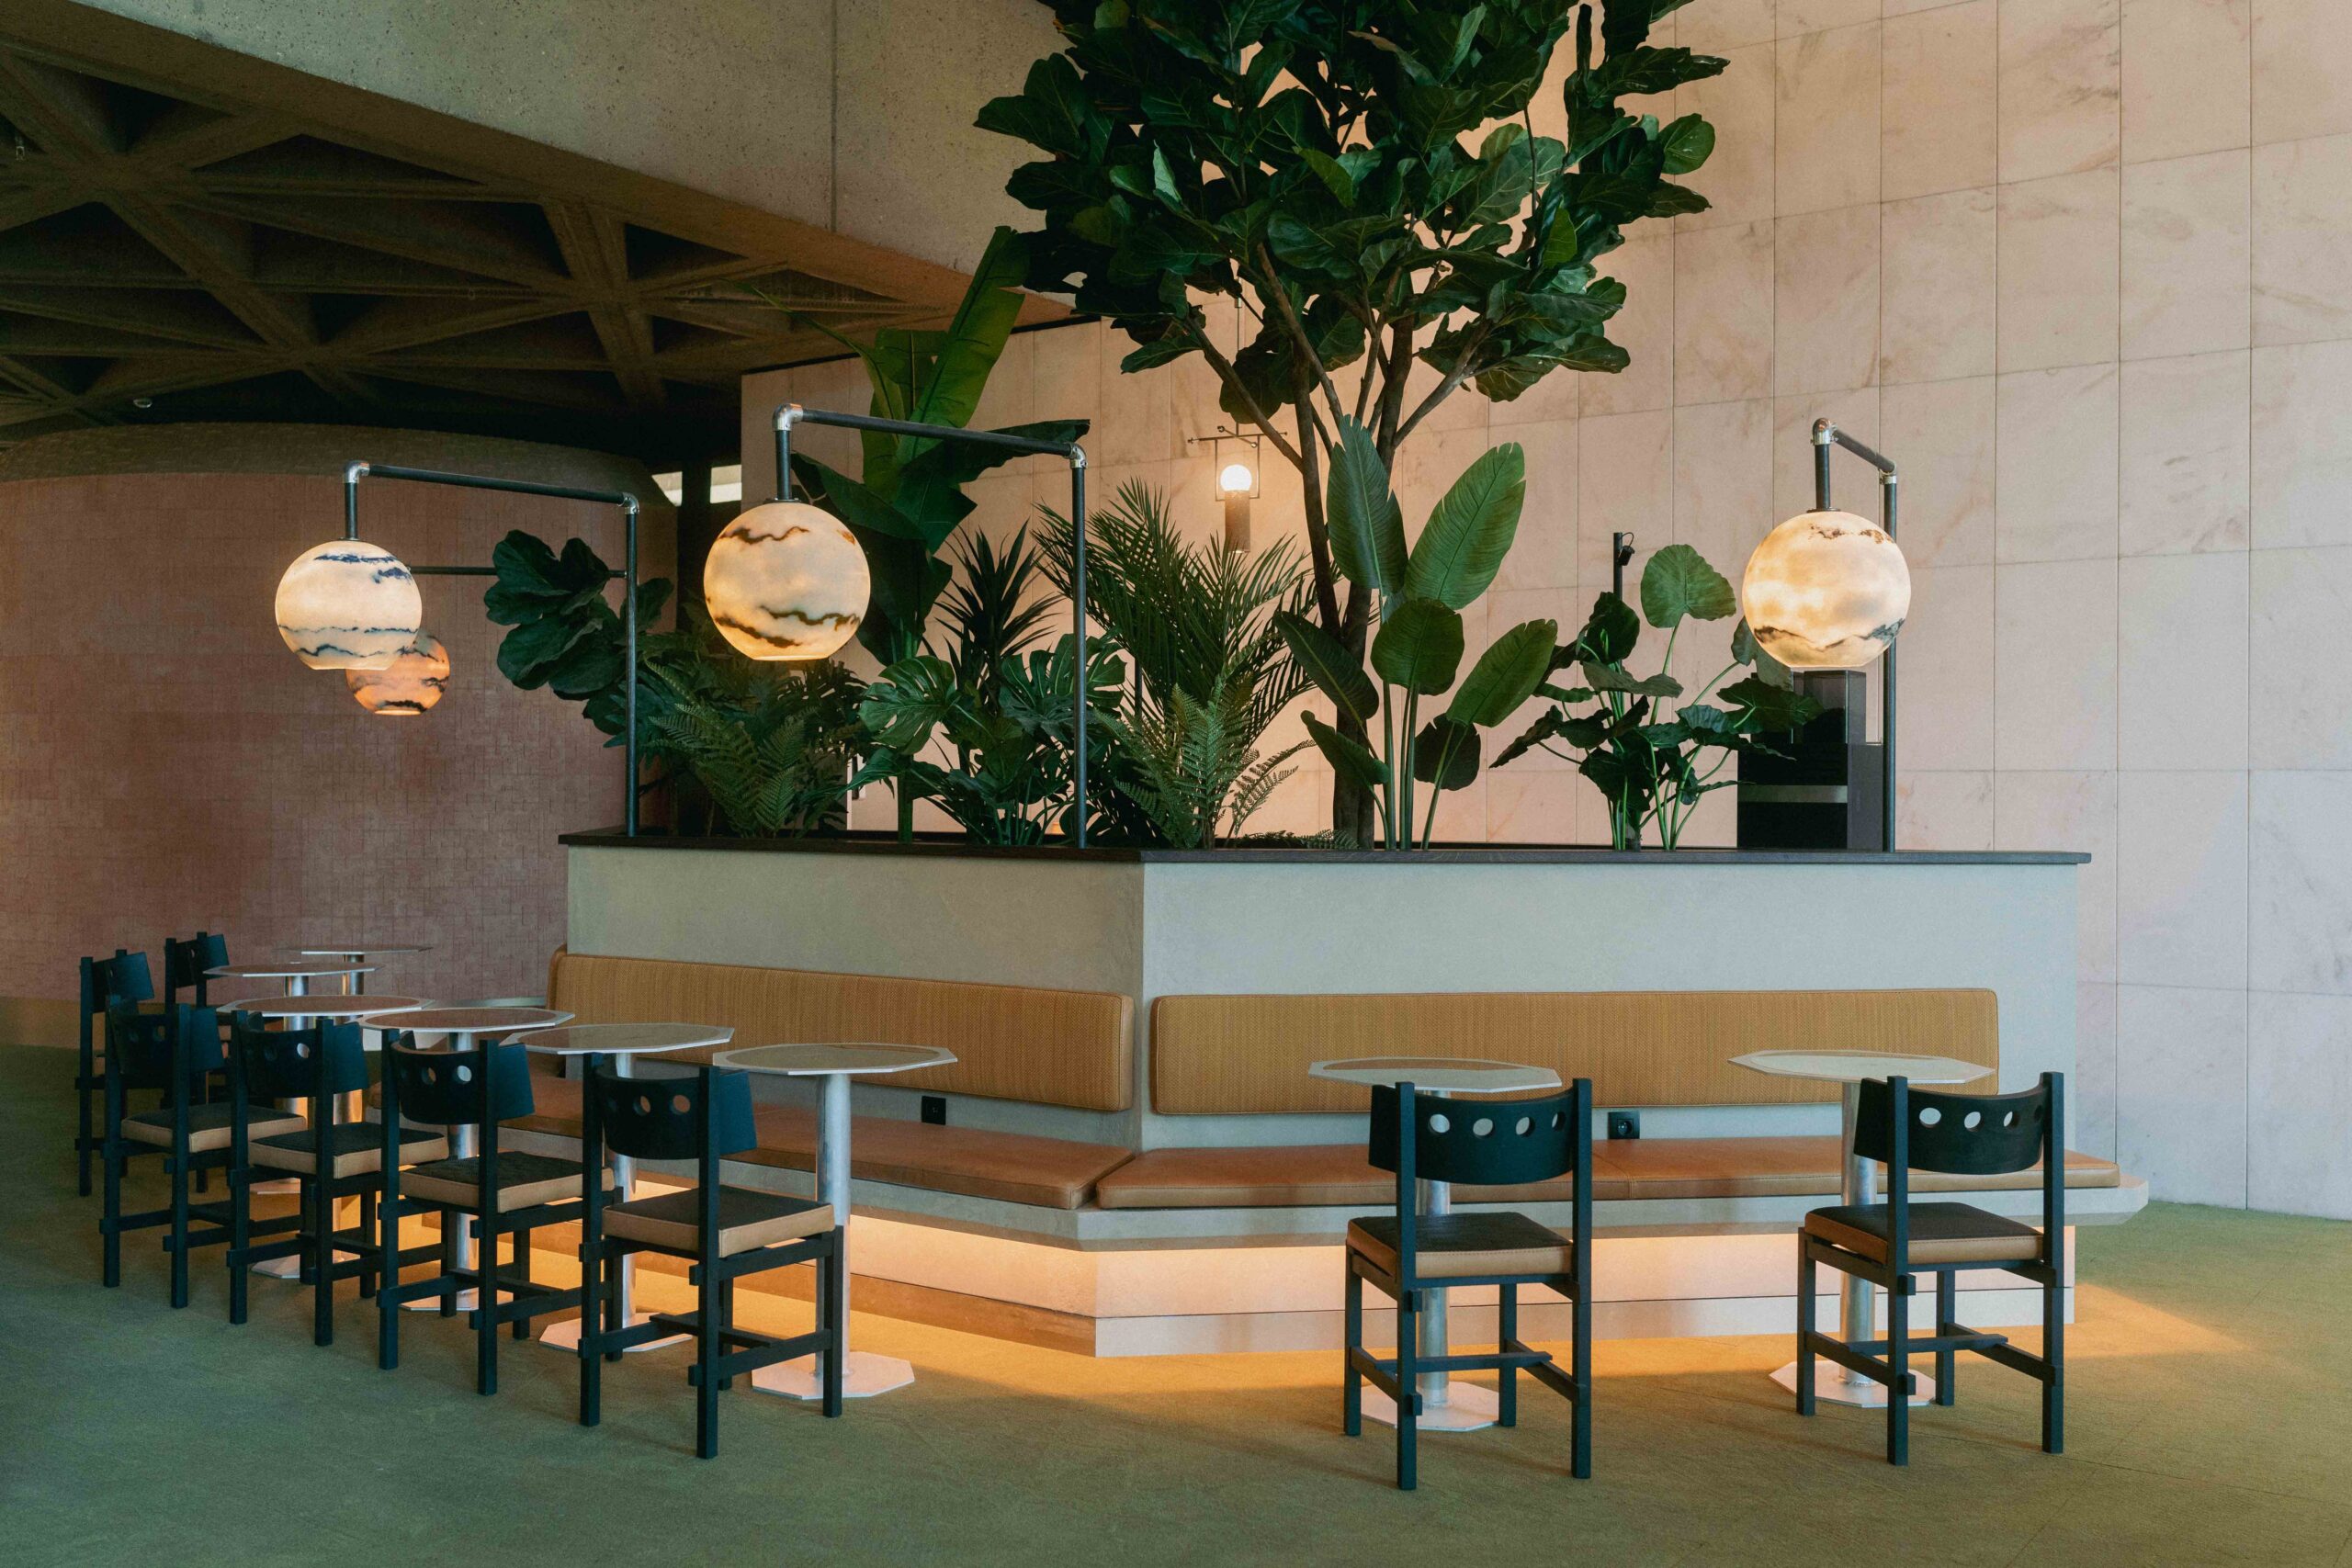 MIX by Brussels Artist Lionel Jadot hotel sitting area with plants